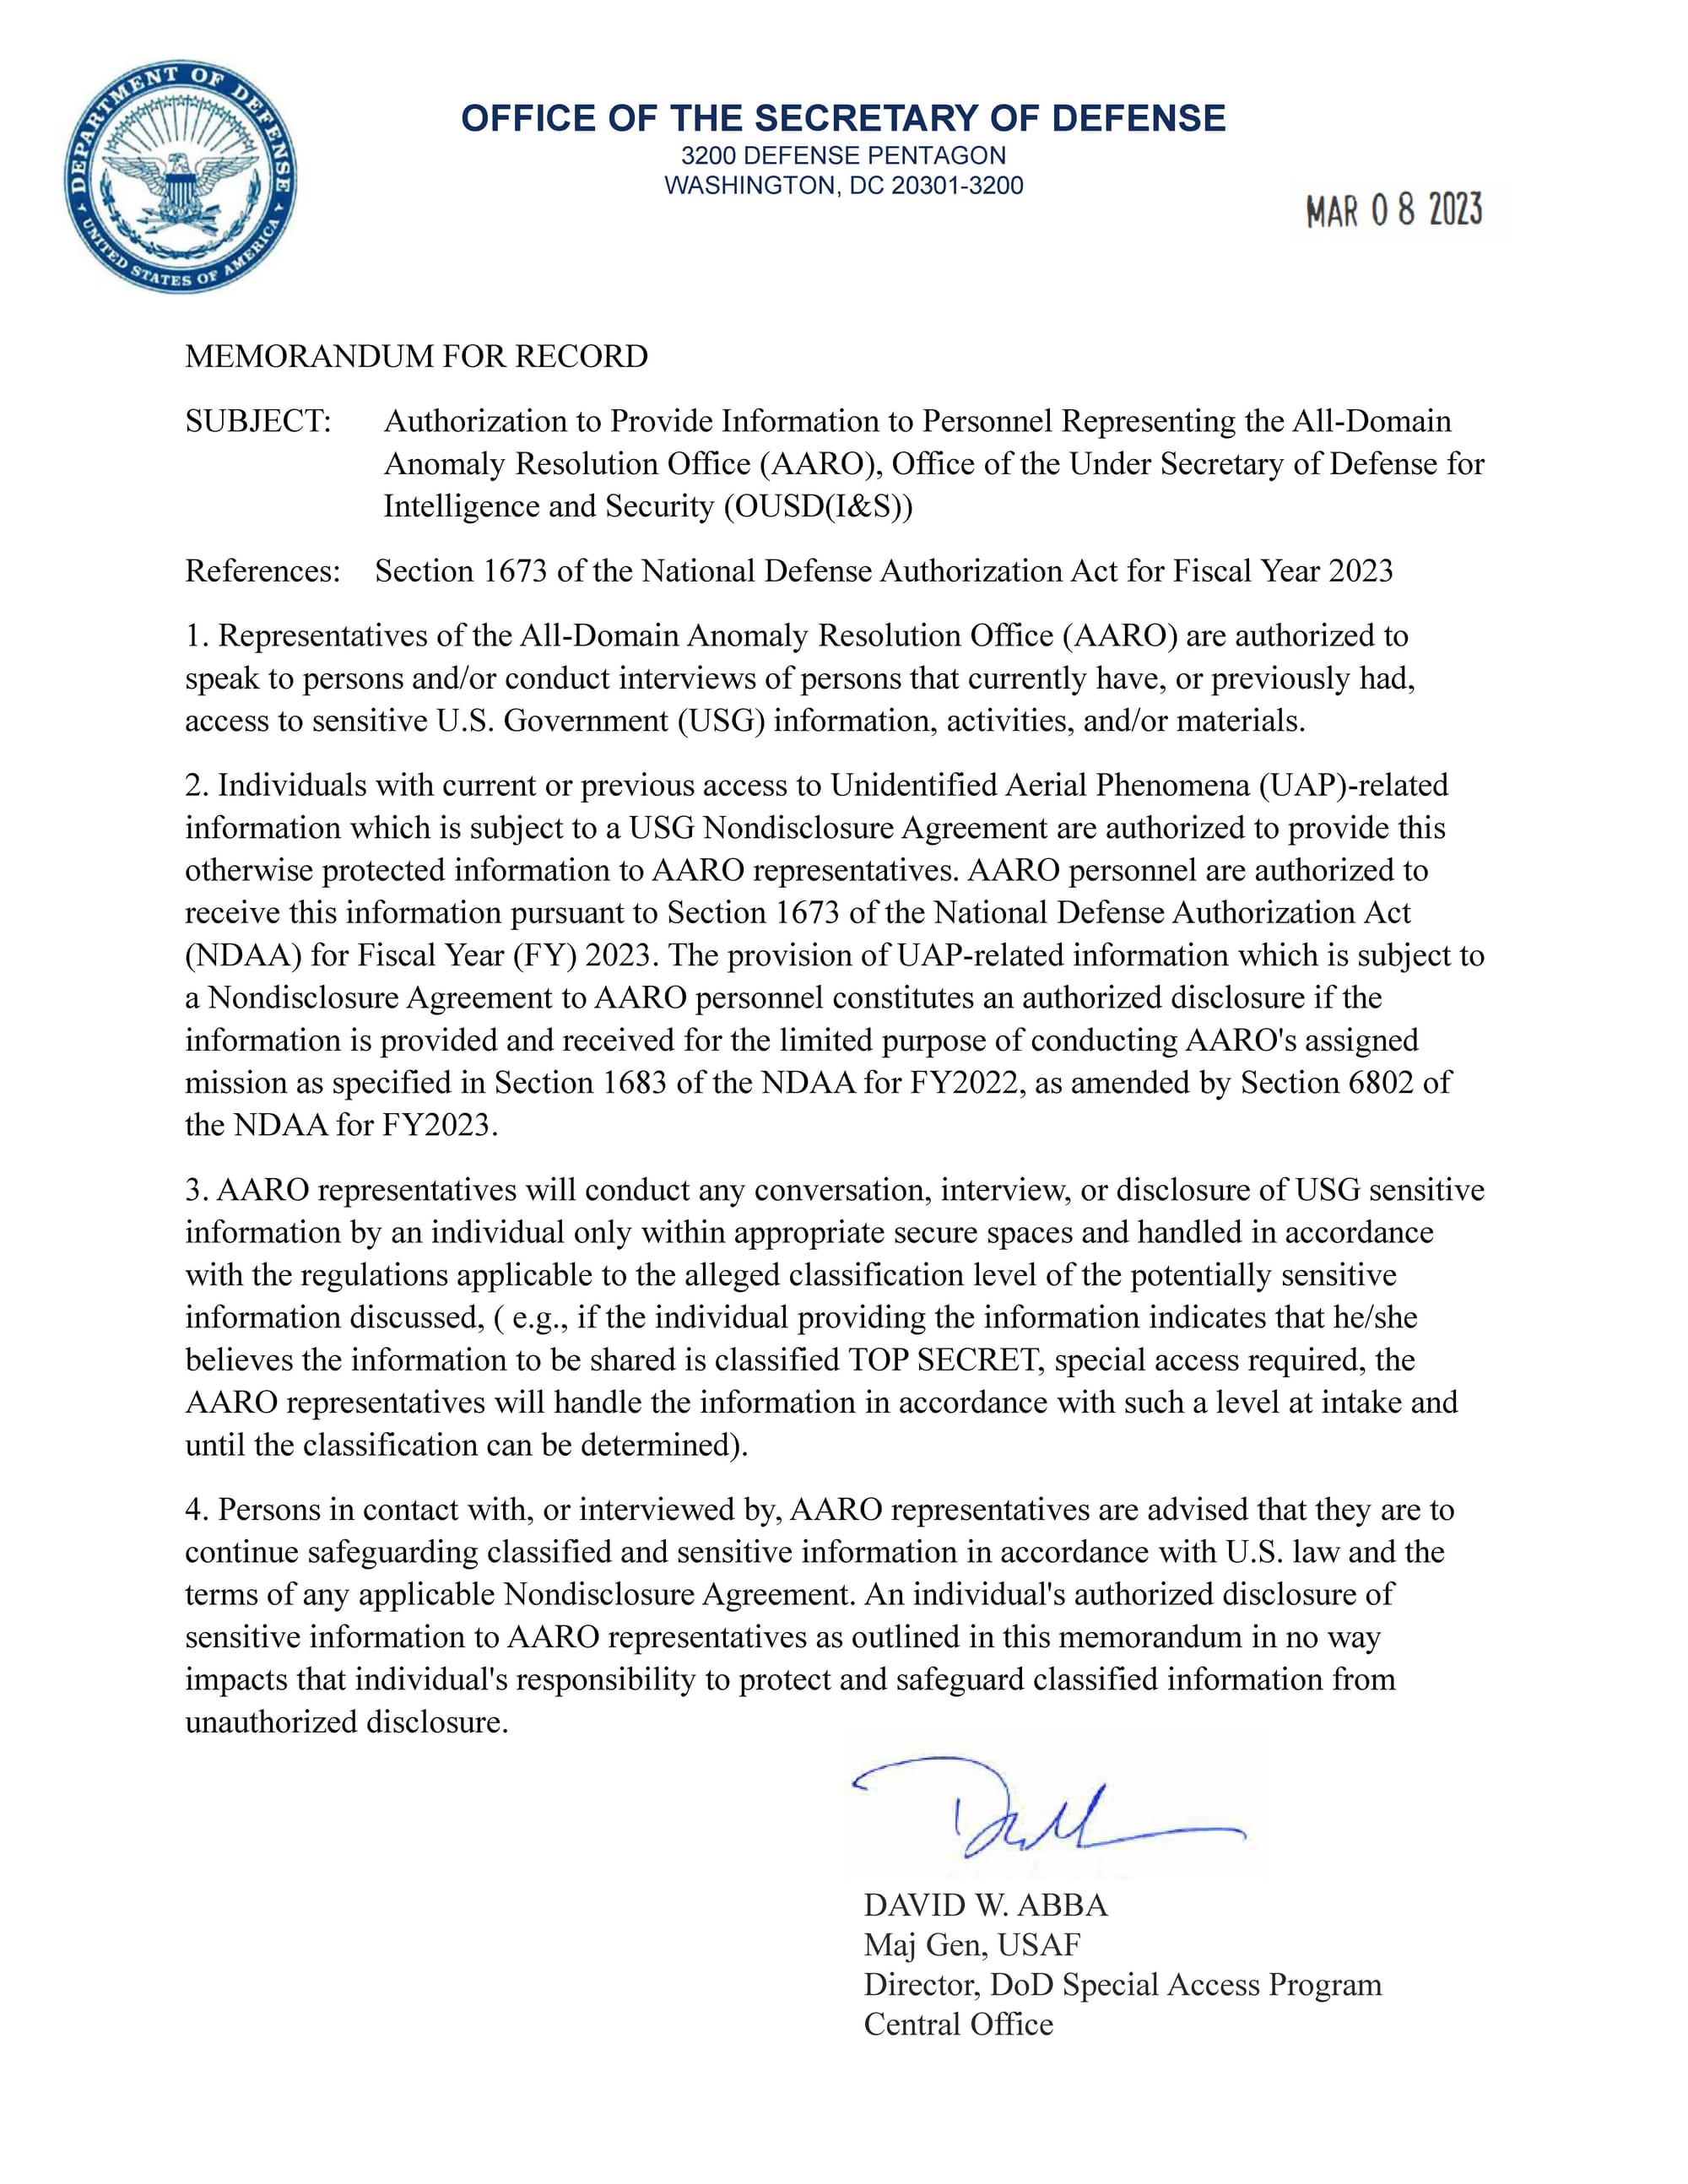 FOIA Release: Joint Chiefs issue worldwide UAP reporting requirements (May 19, 2023)